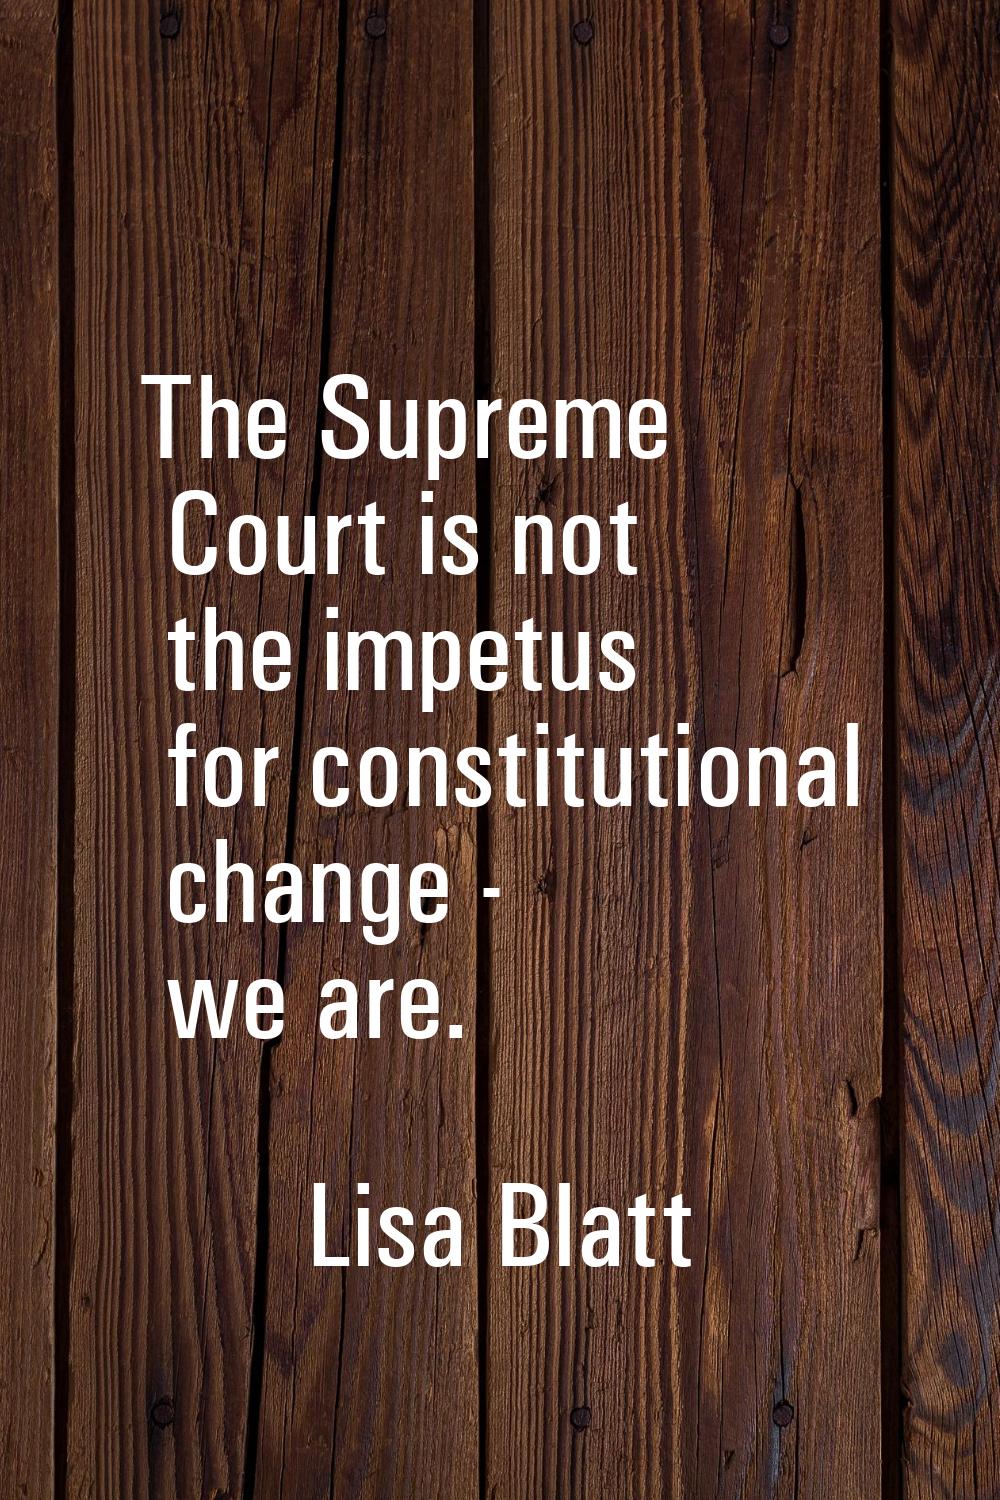 The Supreme Court is not the impetus for constitutional change - we are.